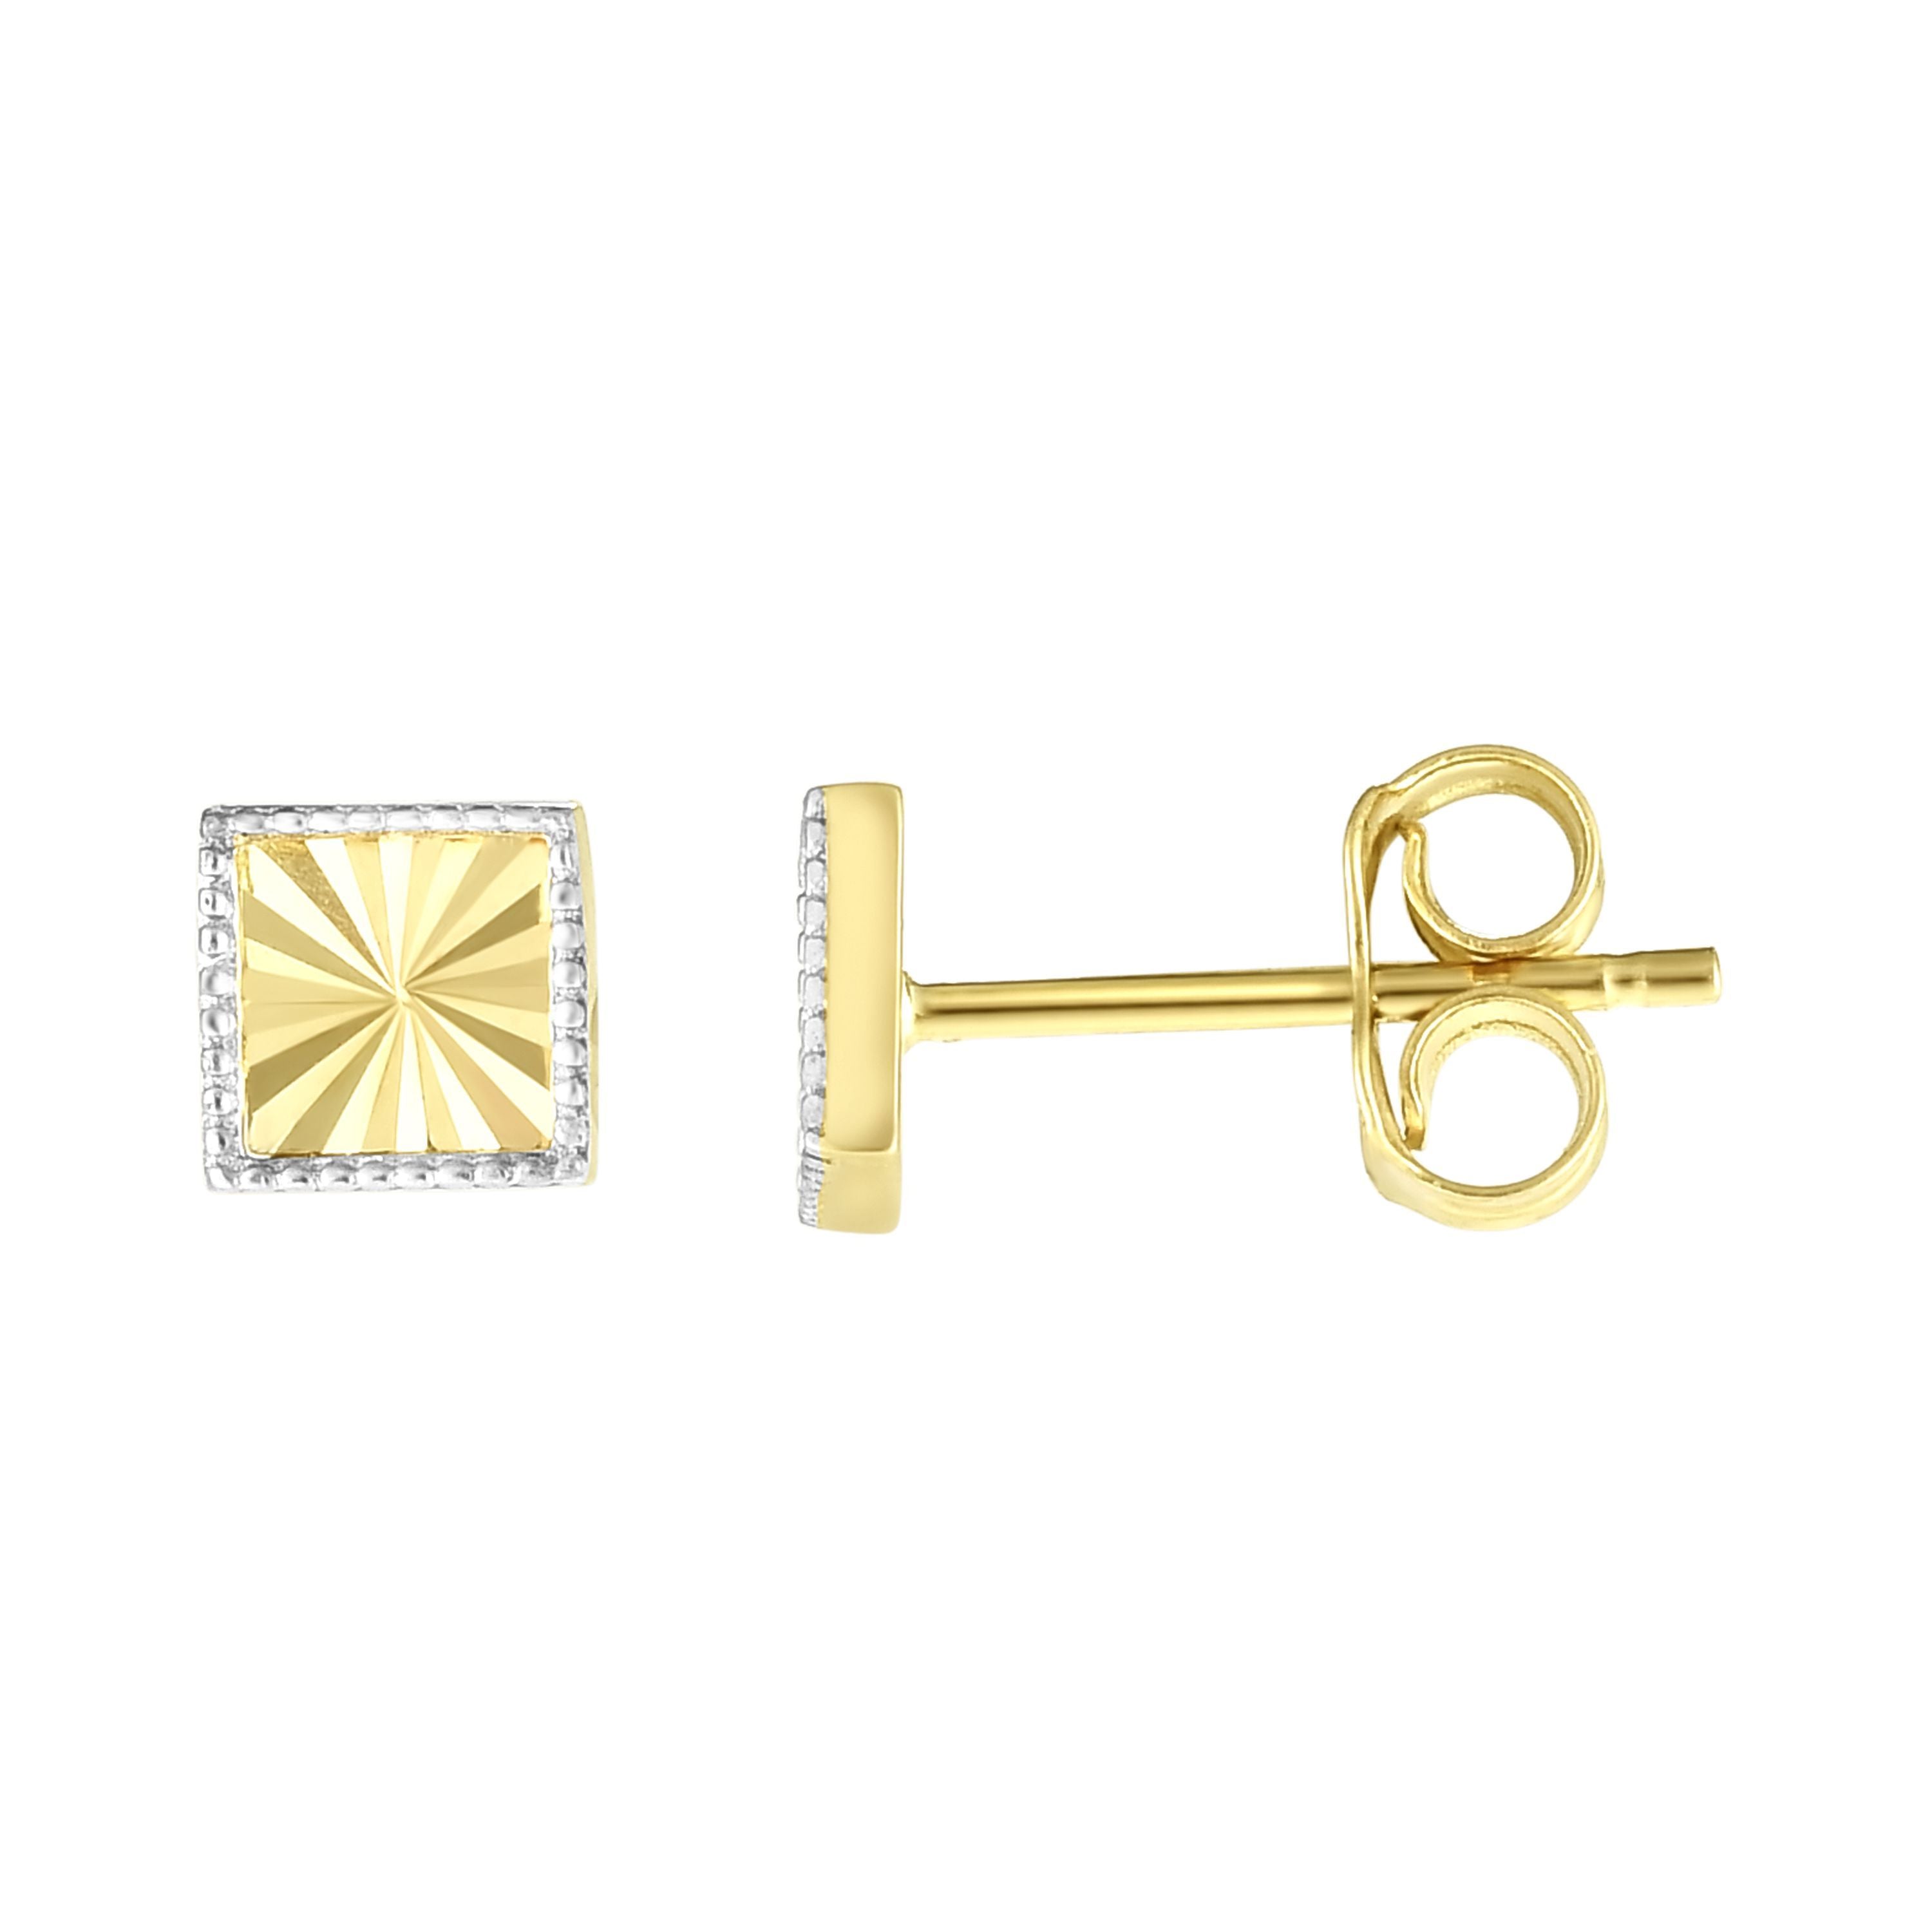 Minimalist Solid Gold Diamond Cut Square Geometry Earrings with Push Back Clasp - wingroupjewelry